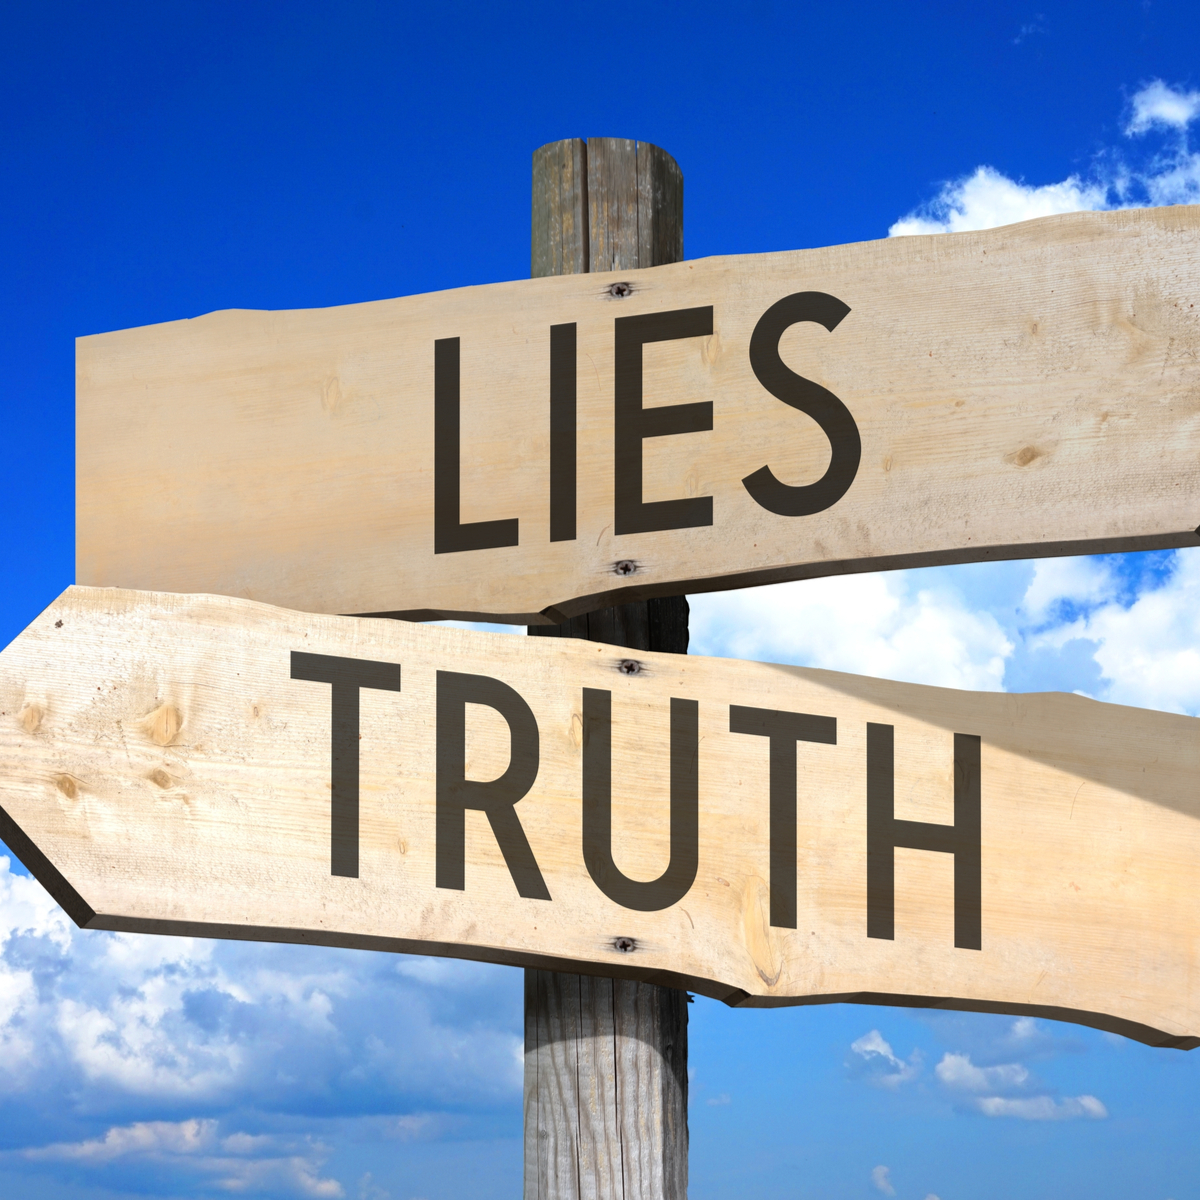 Lies and truth written on wooden signpost